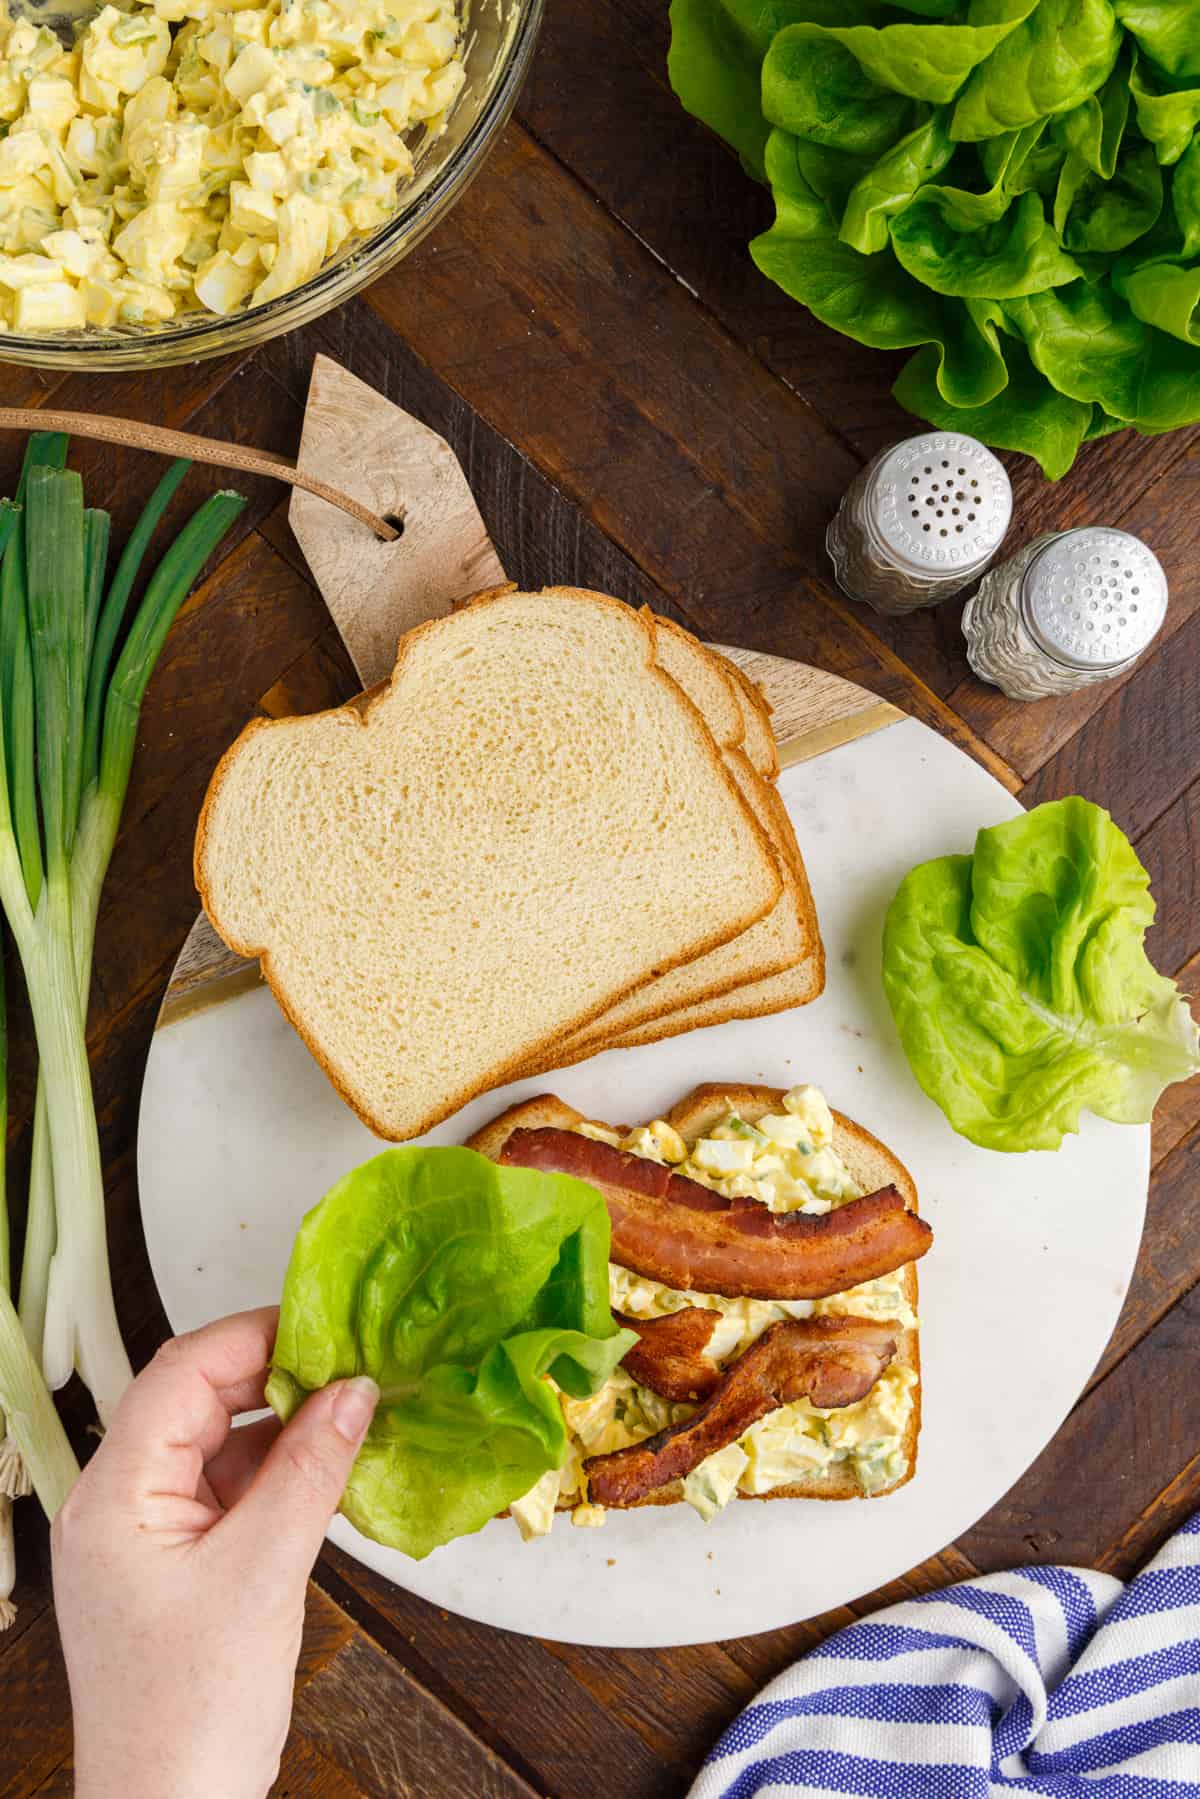 Hand placing lettuce on egg salad sandwich with bacon.